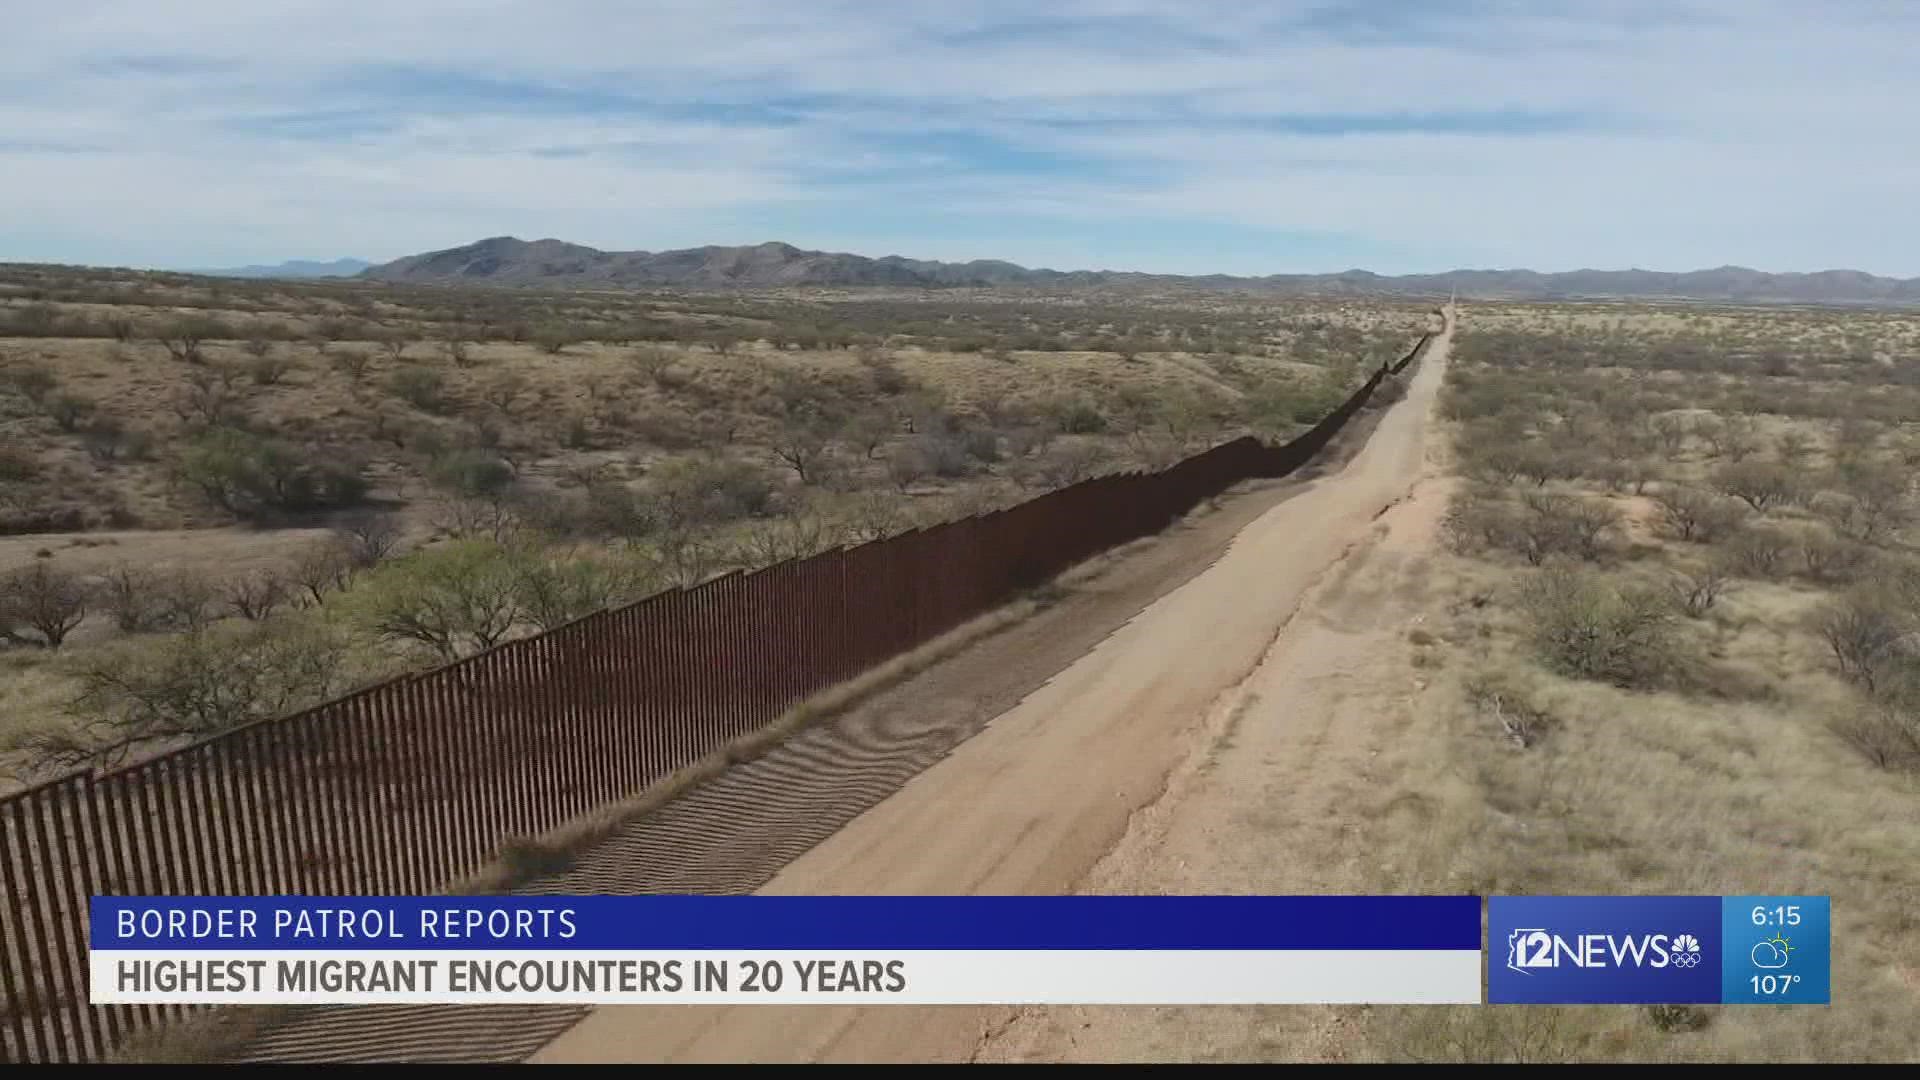 Customs and Border Protection is reporting July had the highest number of migrant encounters in 20 years. About 210,000 migrants were encountered last month.